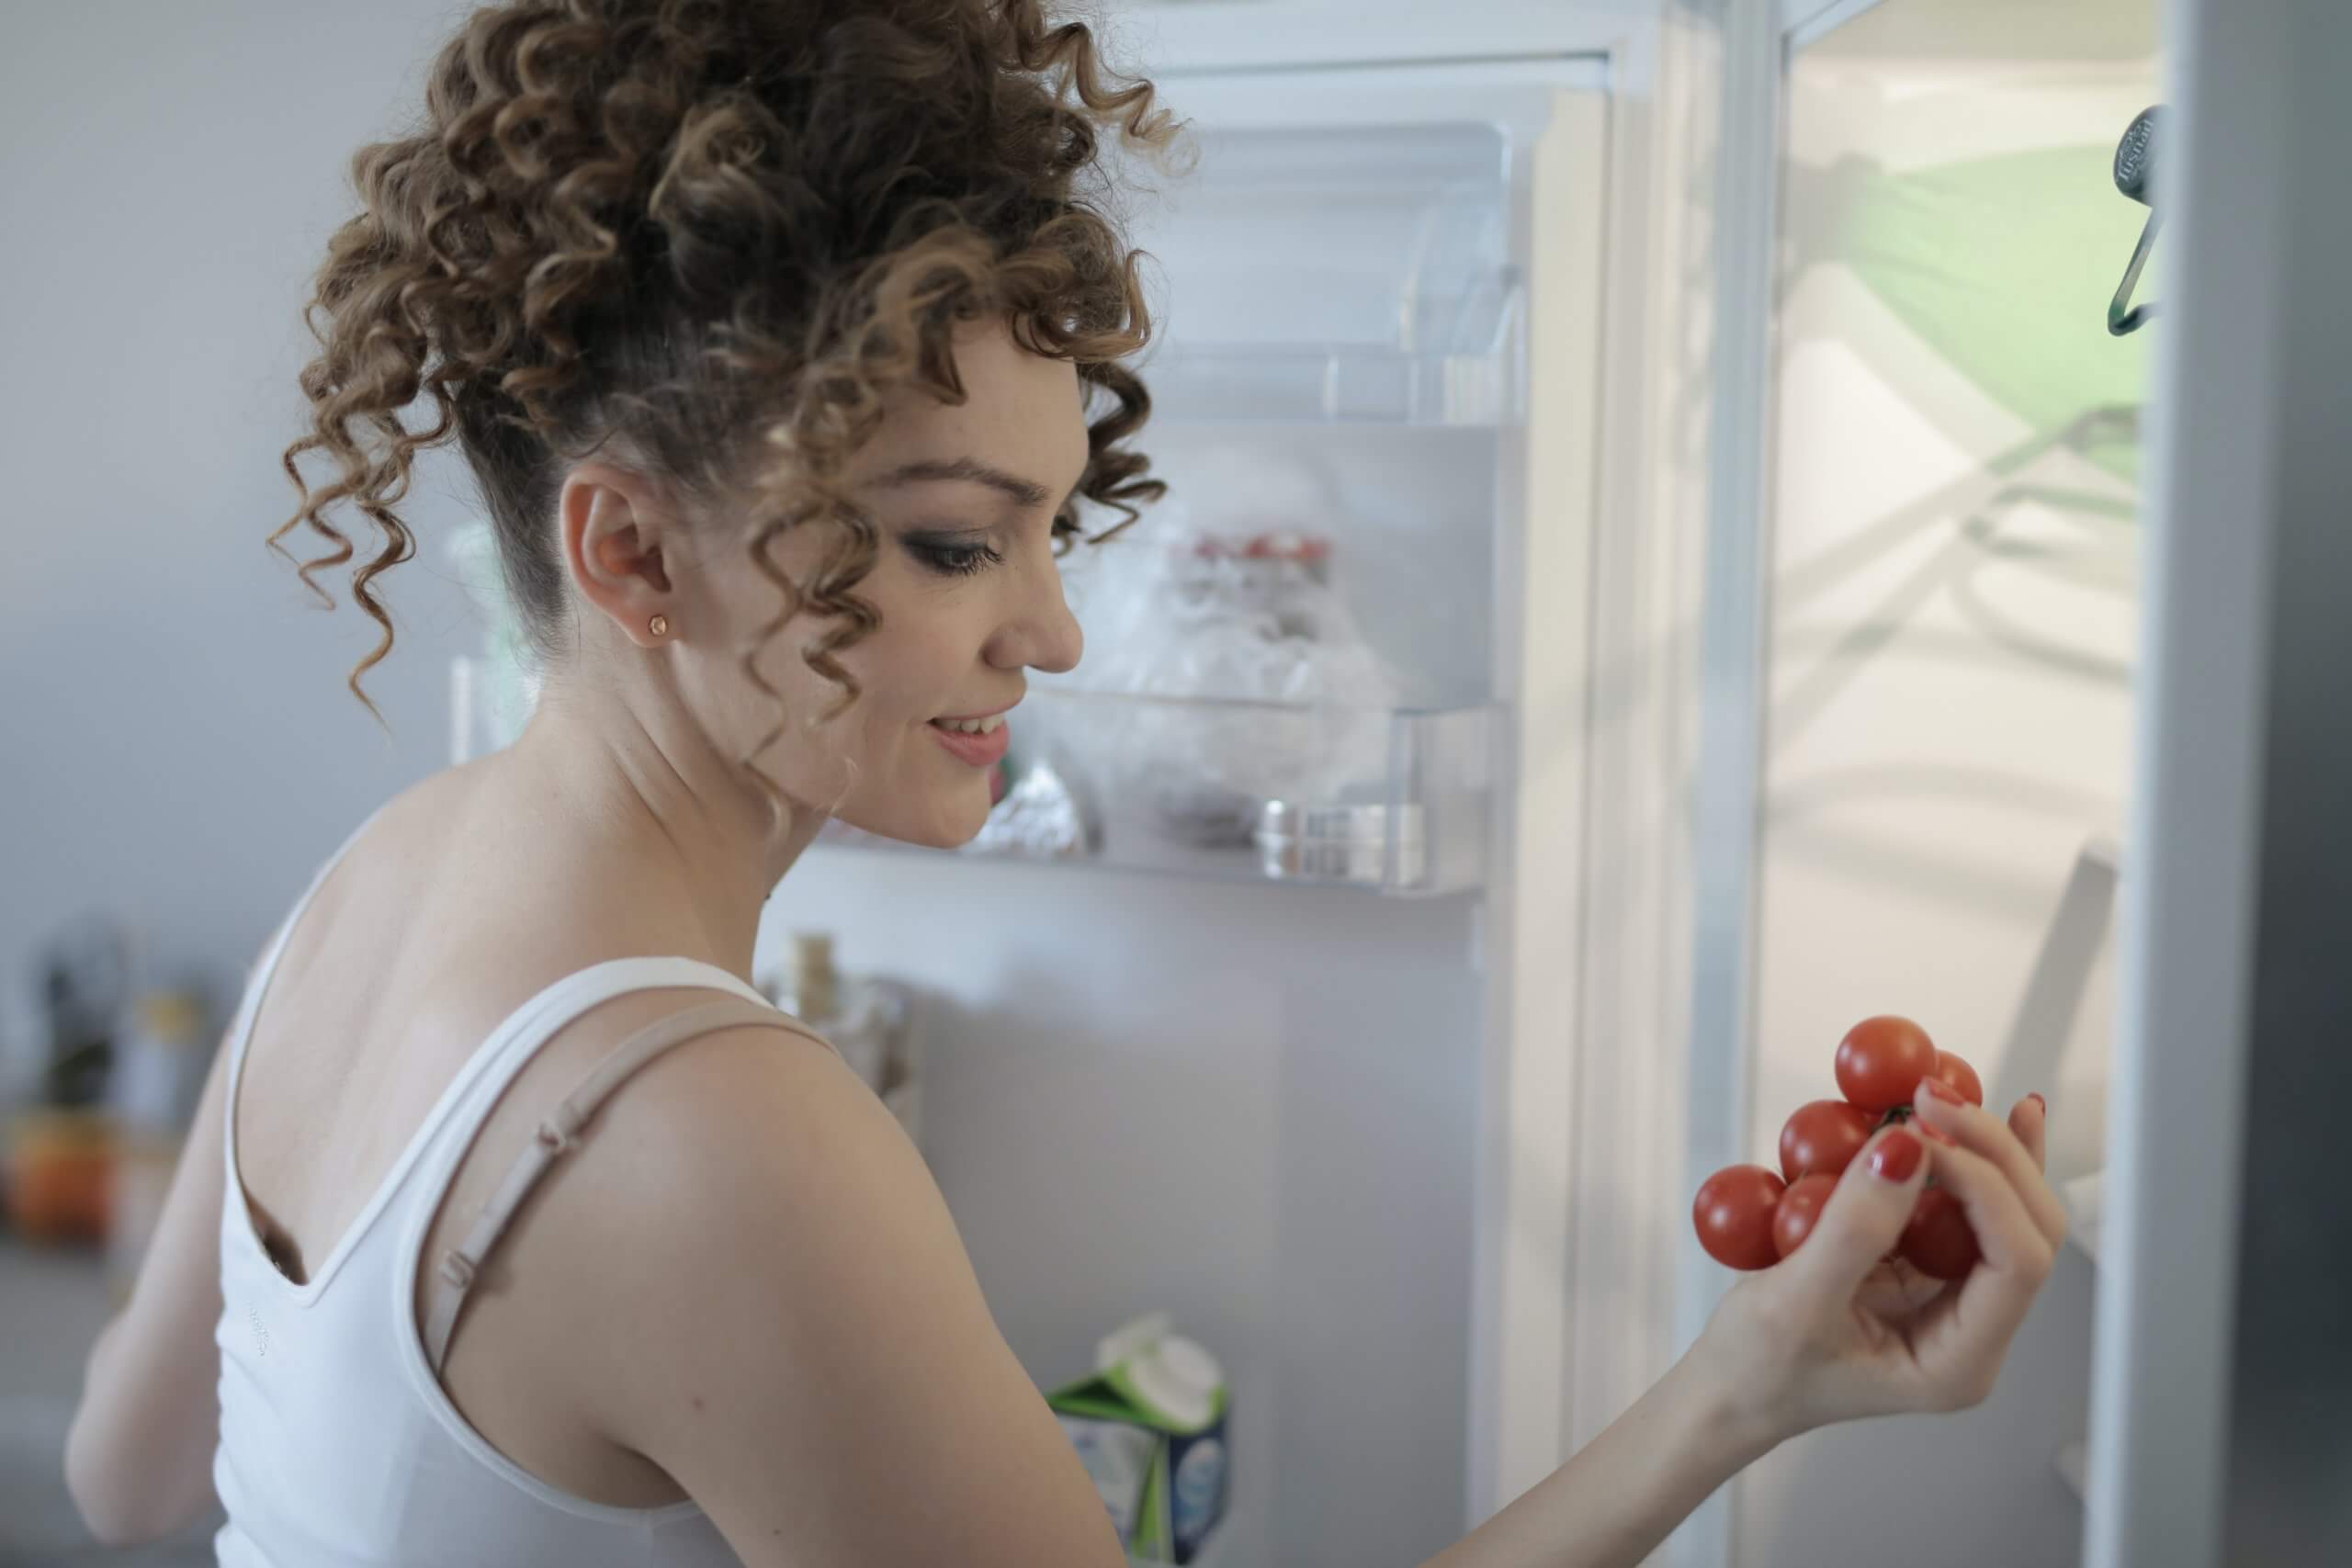 Woman looking through refrigerator holding tomatoes